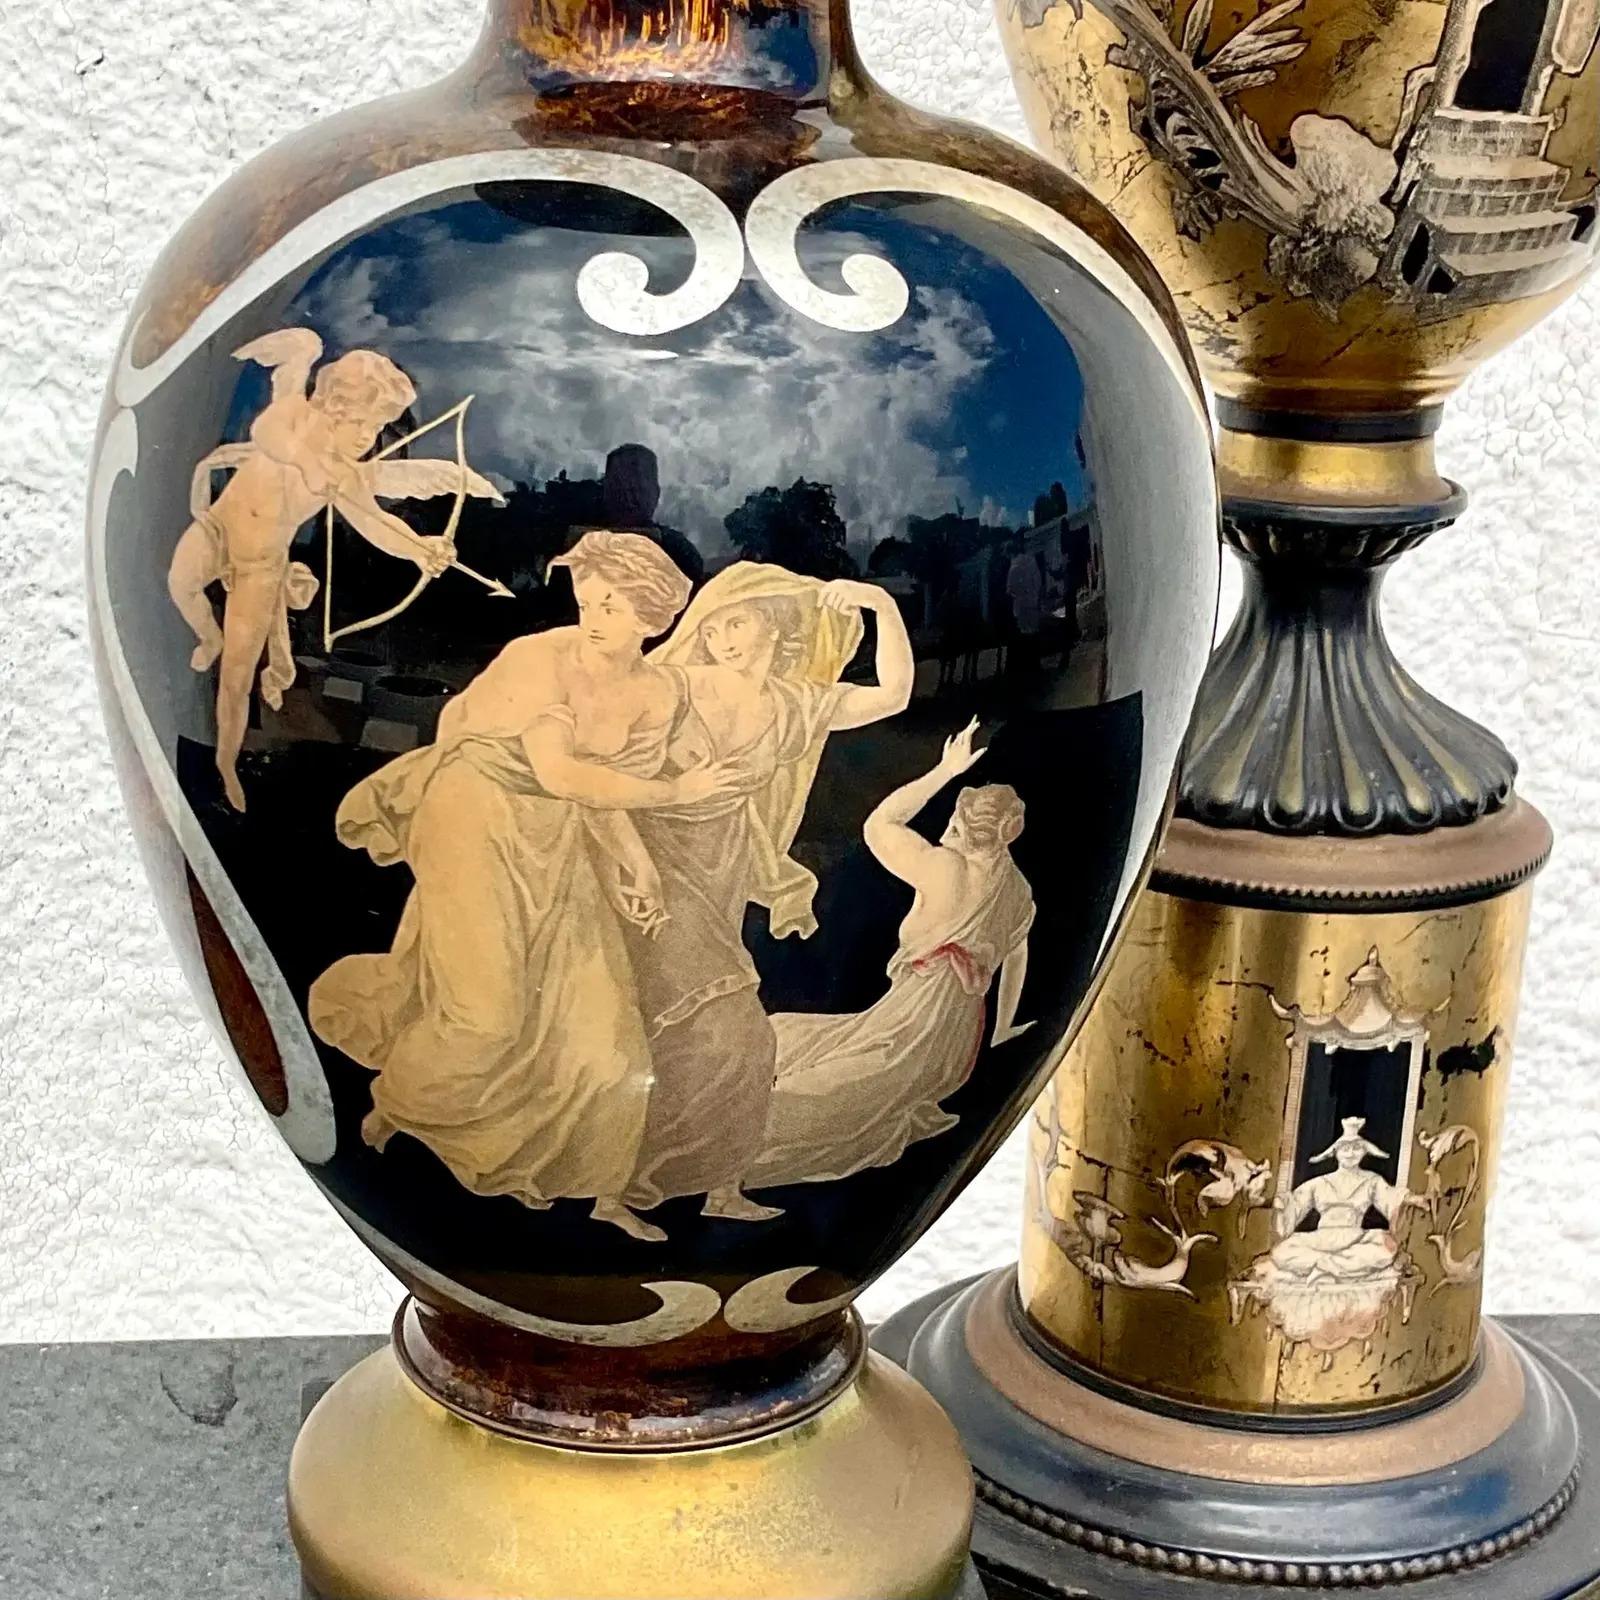 Fantastic vintage Regency table lamp. Incredible reverse painted glass dome. Beautiful scene of Cupid and the Ladies. Another lamp from the same collector also available. Acquired from a Palm Beach estate.